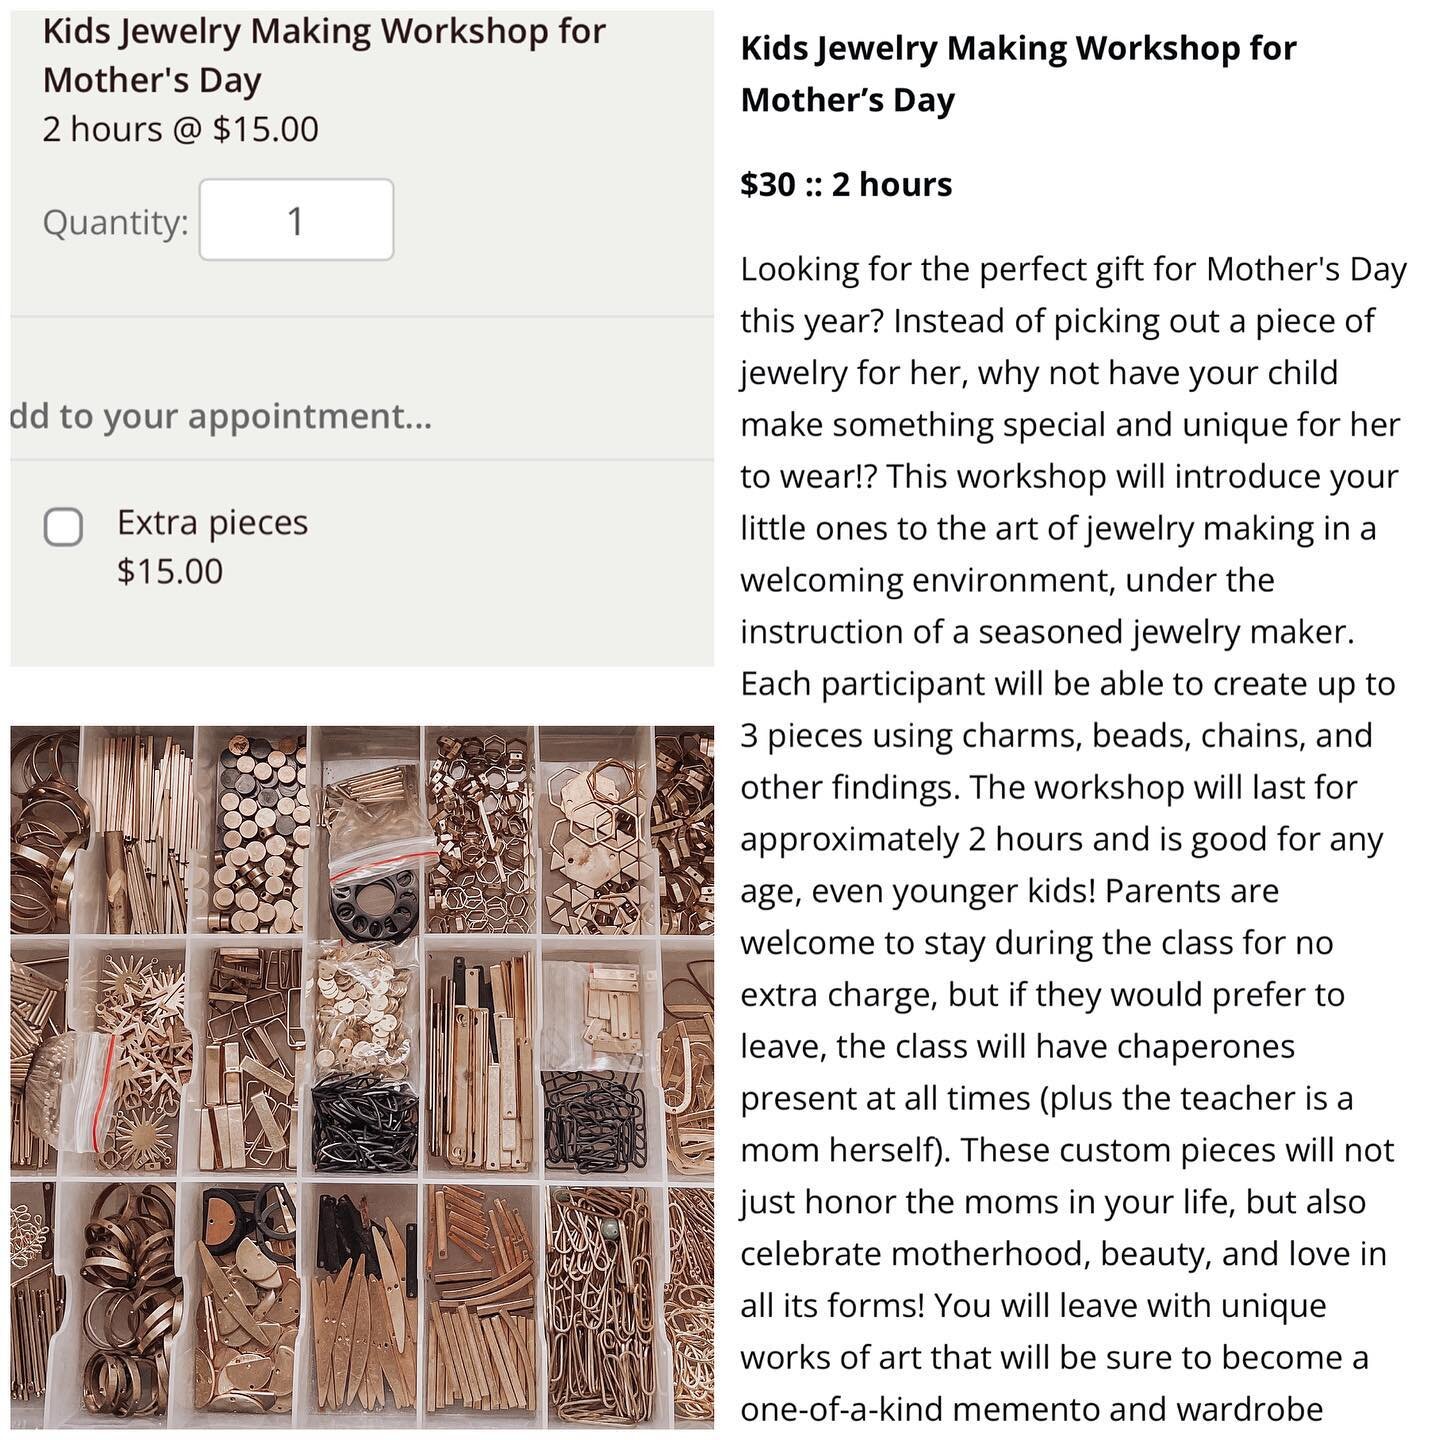 Join us for todays first kids jewelry making workshop! Perfect for Mother&rsquo;s Day gift or to just get that creativity flowing! Walk-ins welcome from 12-2 or visit our website to register for another date.
$15 to make two pieces (pair of earrings 